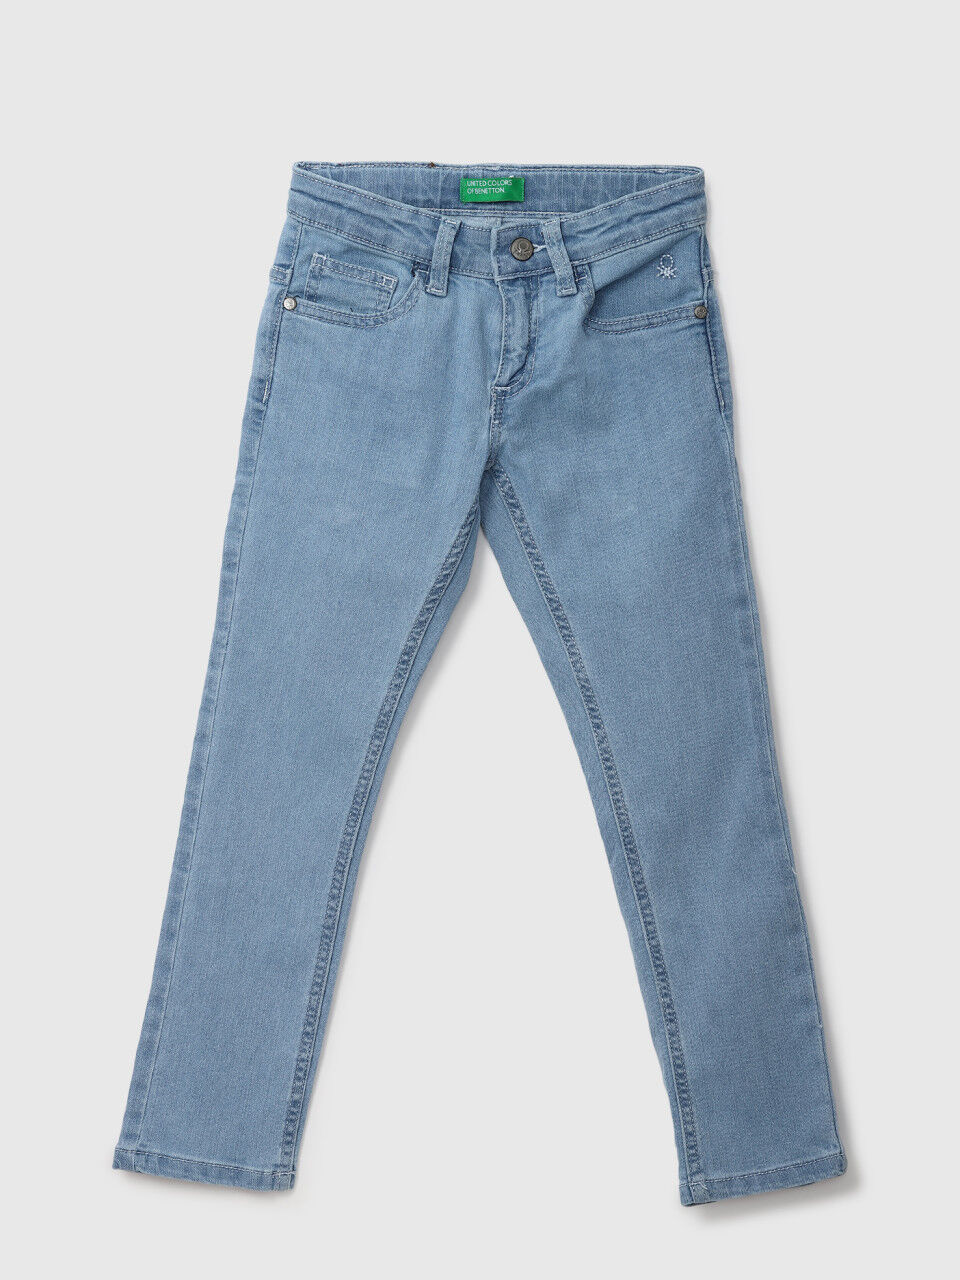 Junior Boys' Jeans and Joggers New Collection 2021 | Benetton